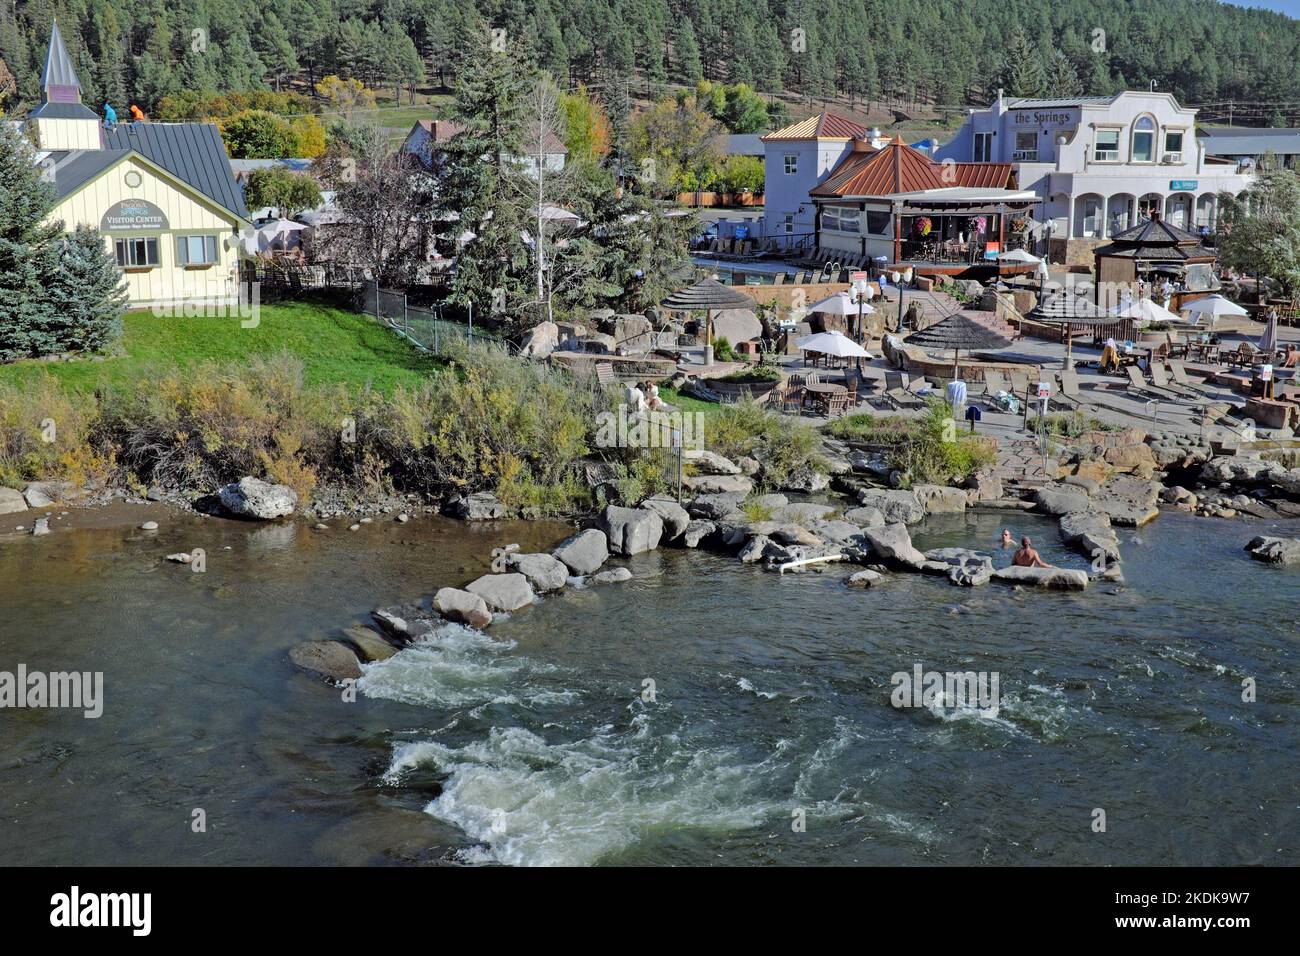 An overview of The Springs Resort and its neighboring Pagosa Springs Area Visitor Center along the San Juan River in Pagosa Springs, Colorado, USA. Stock Photo